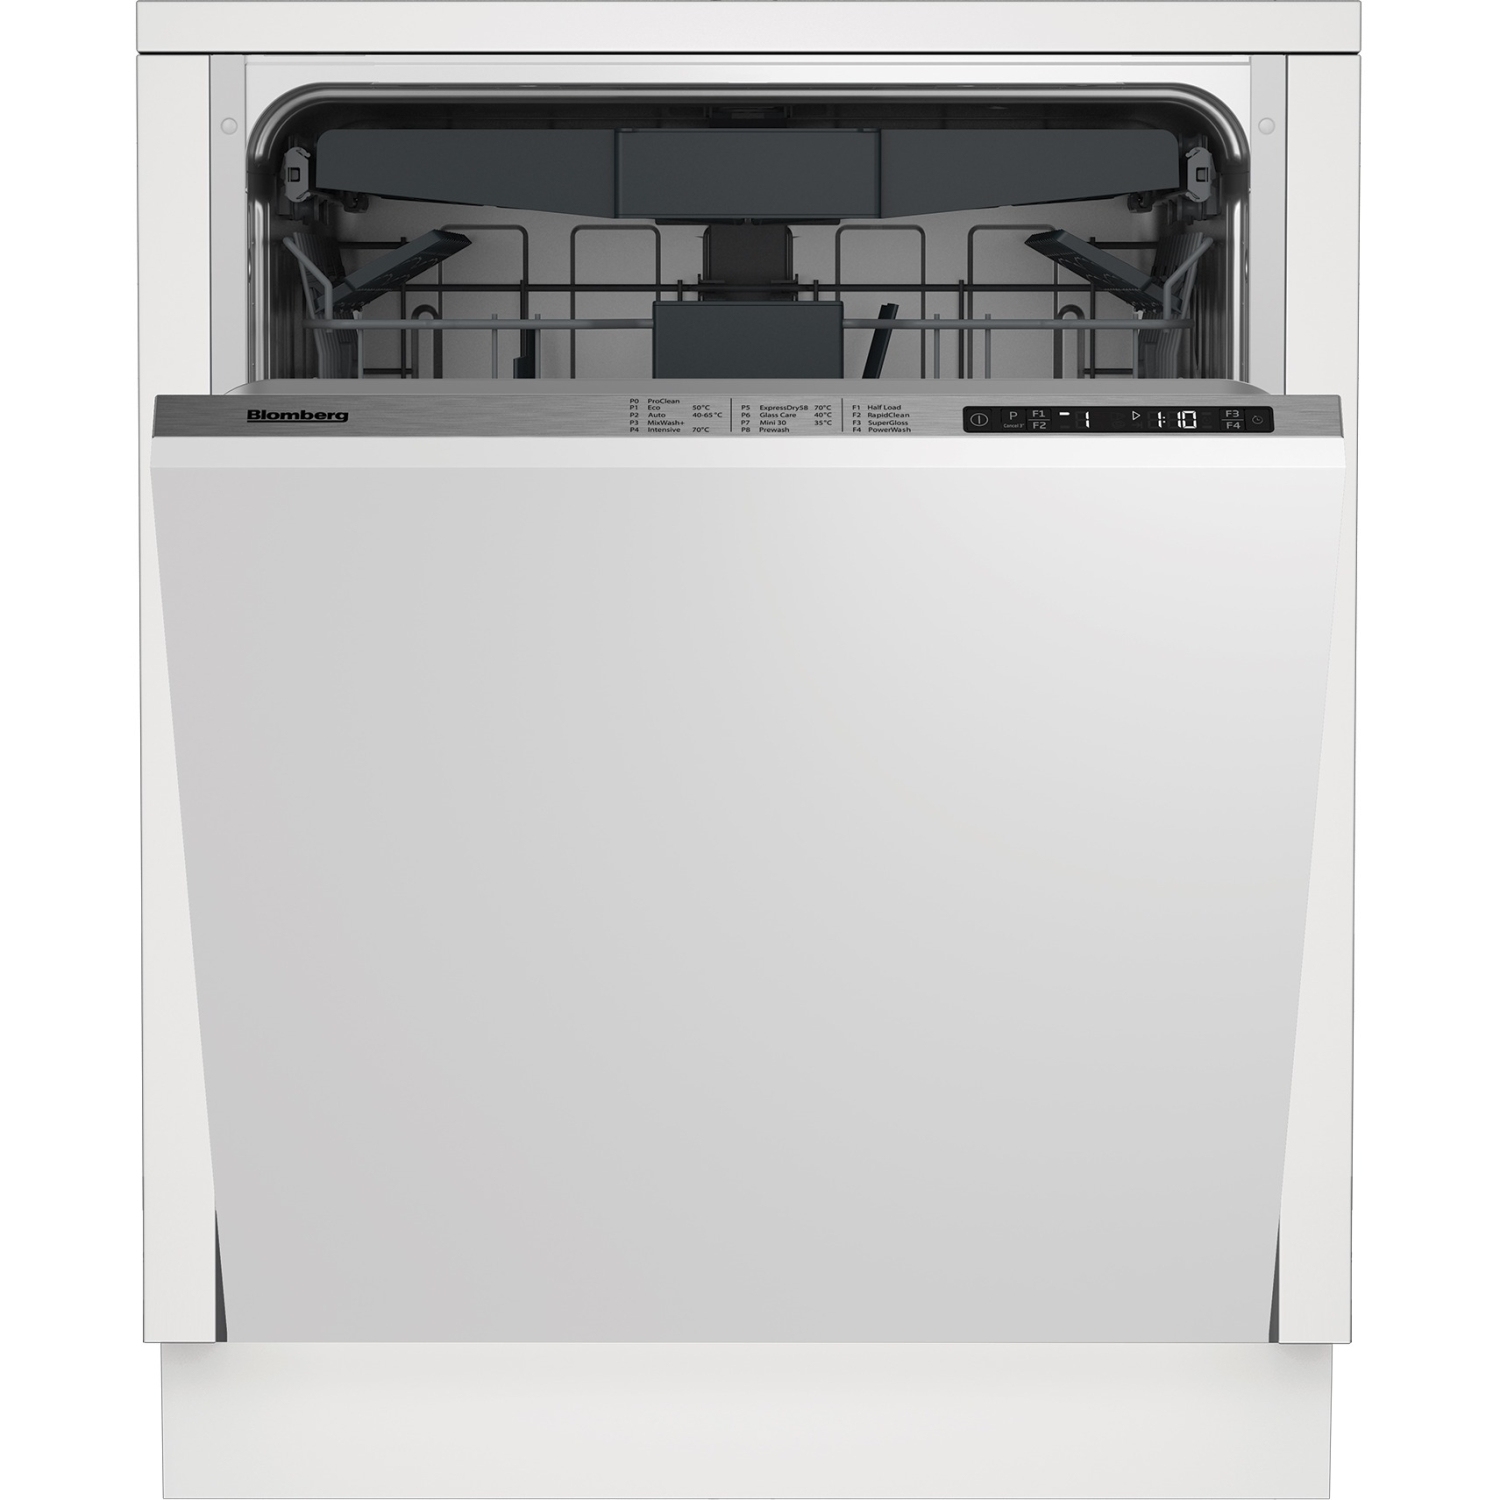 Blomberg LDV42244 Integrated Full Size Dishwasher Free 5 year warranty Which recommend - 0